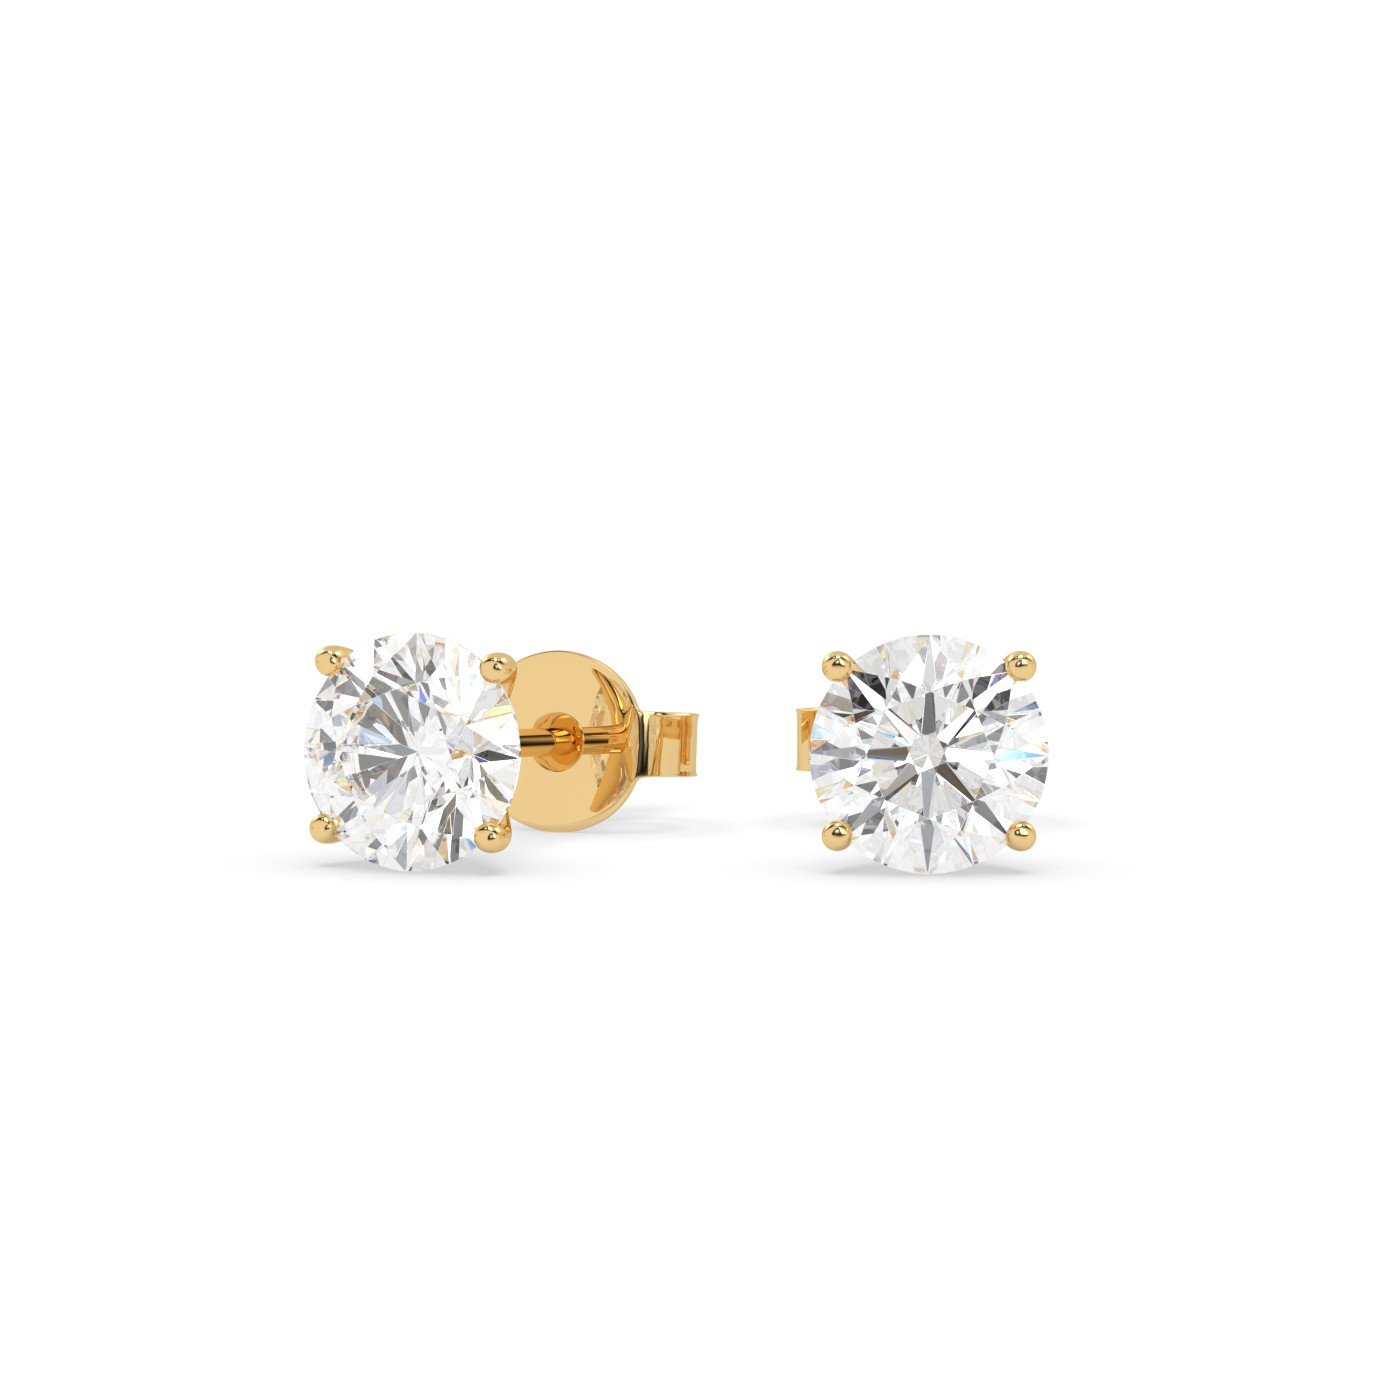 18k yellow gold  1.4 carat round stud earrings with butterfly back Photos & images